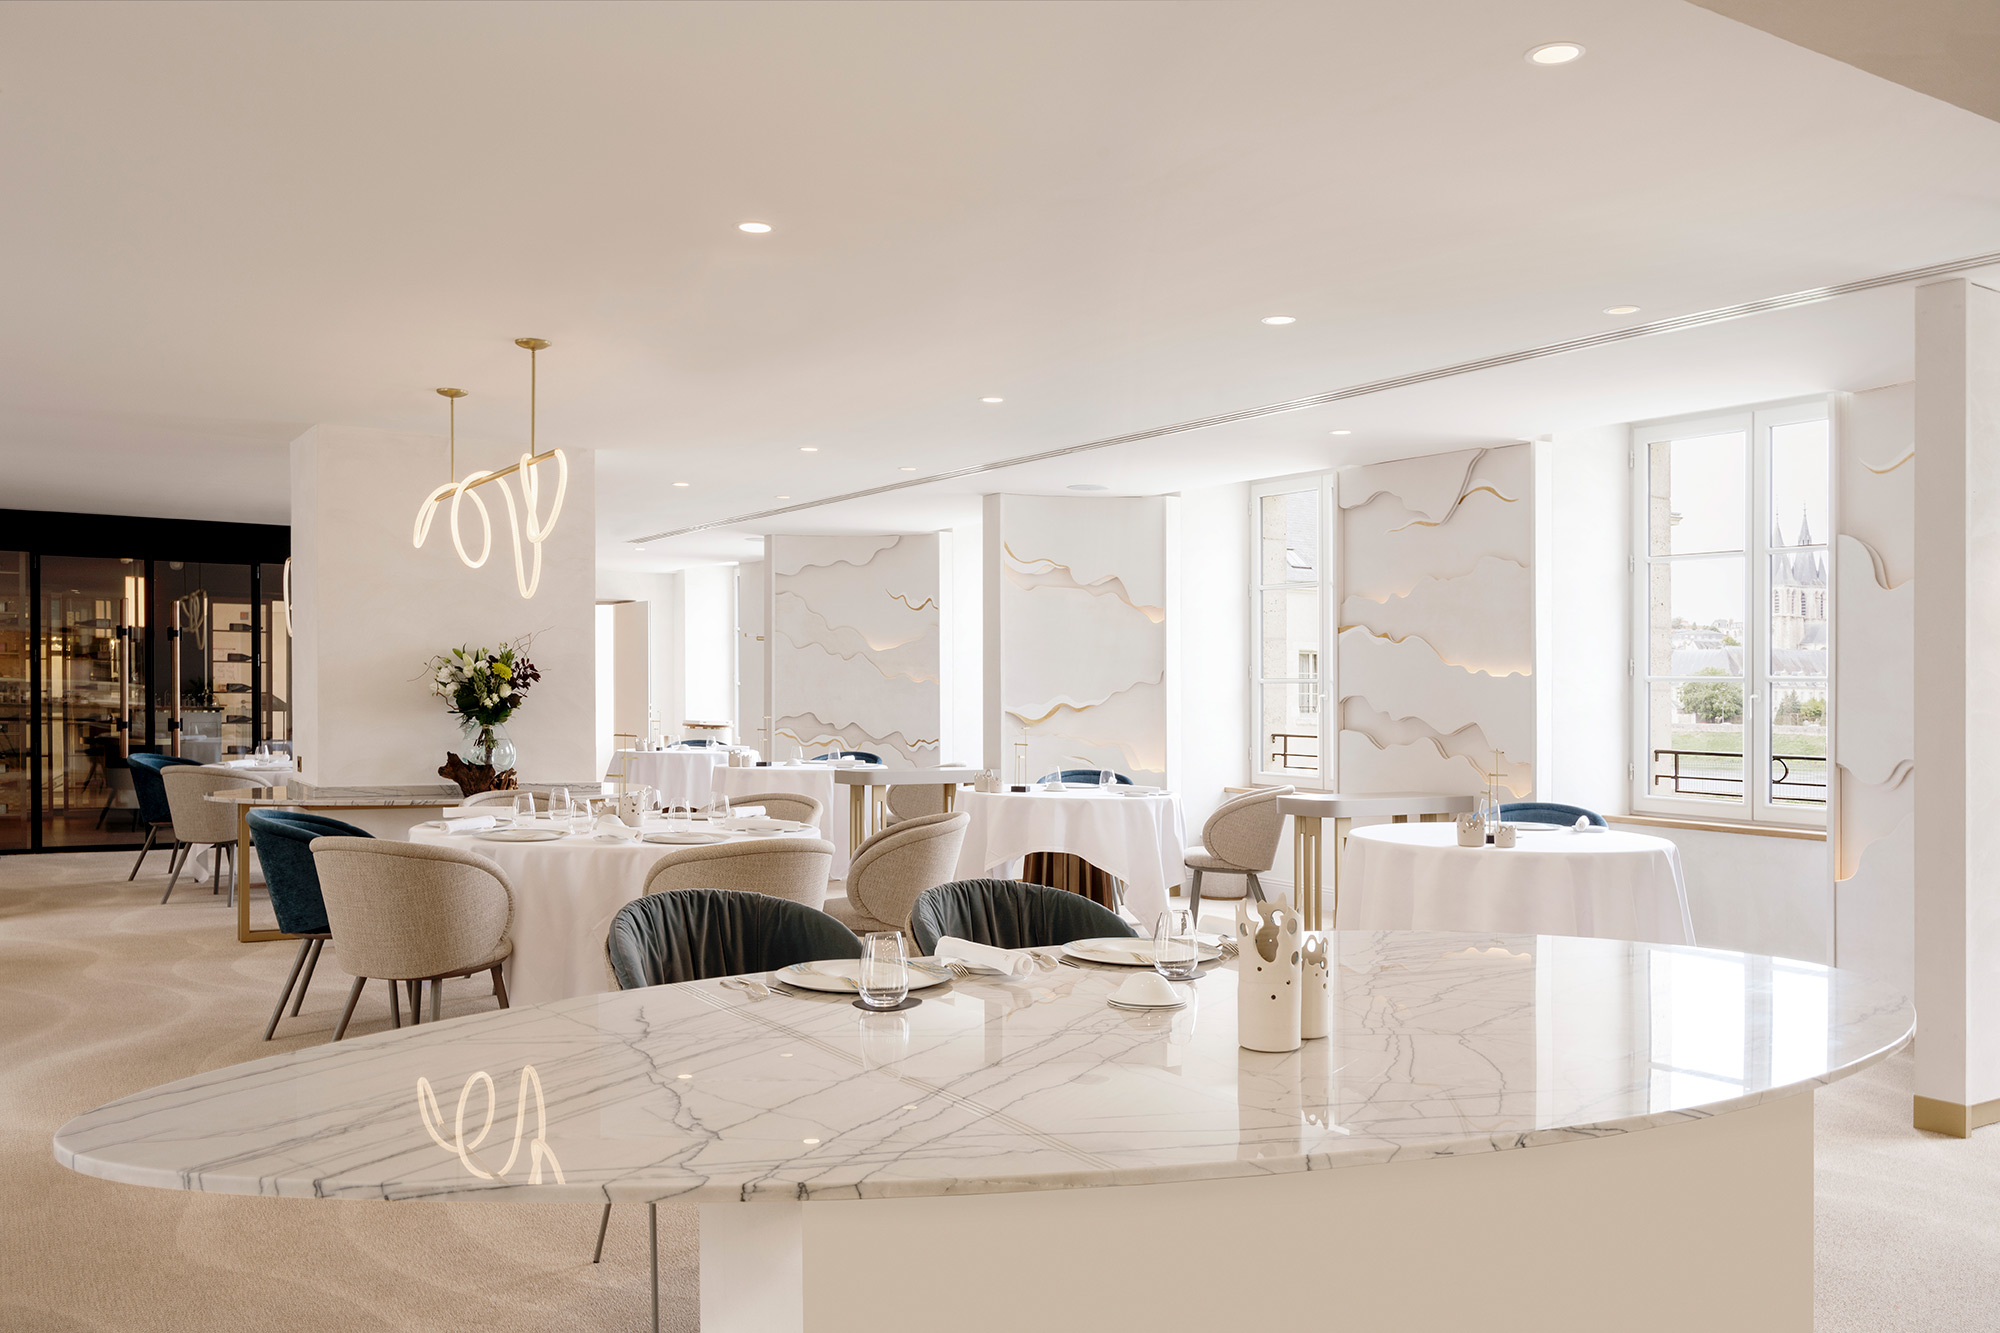 Image of Hotel Fleur de Loire 12 in {{The sophistication and strength of Cosentino brands for award-winning chef Christophe Hay’s new 5-star hotel }} - Cosentino